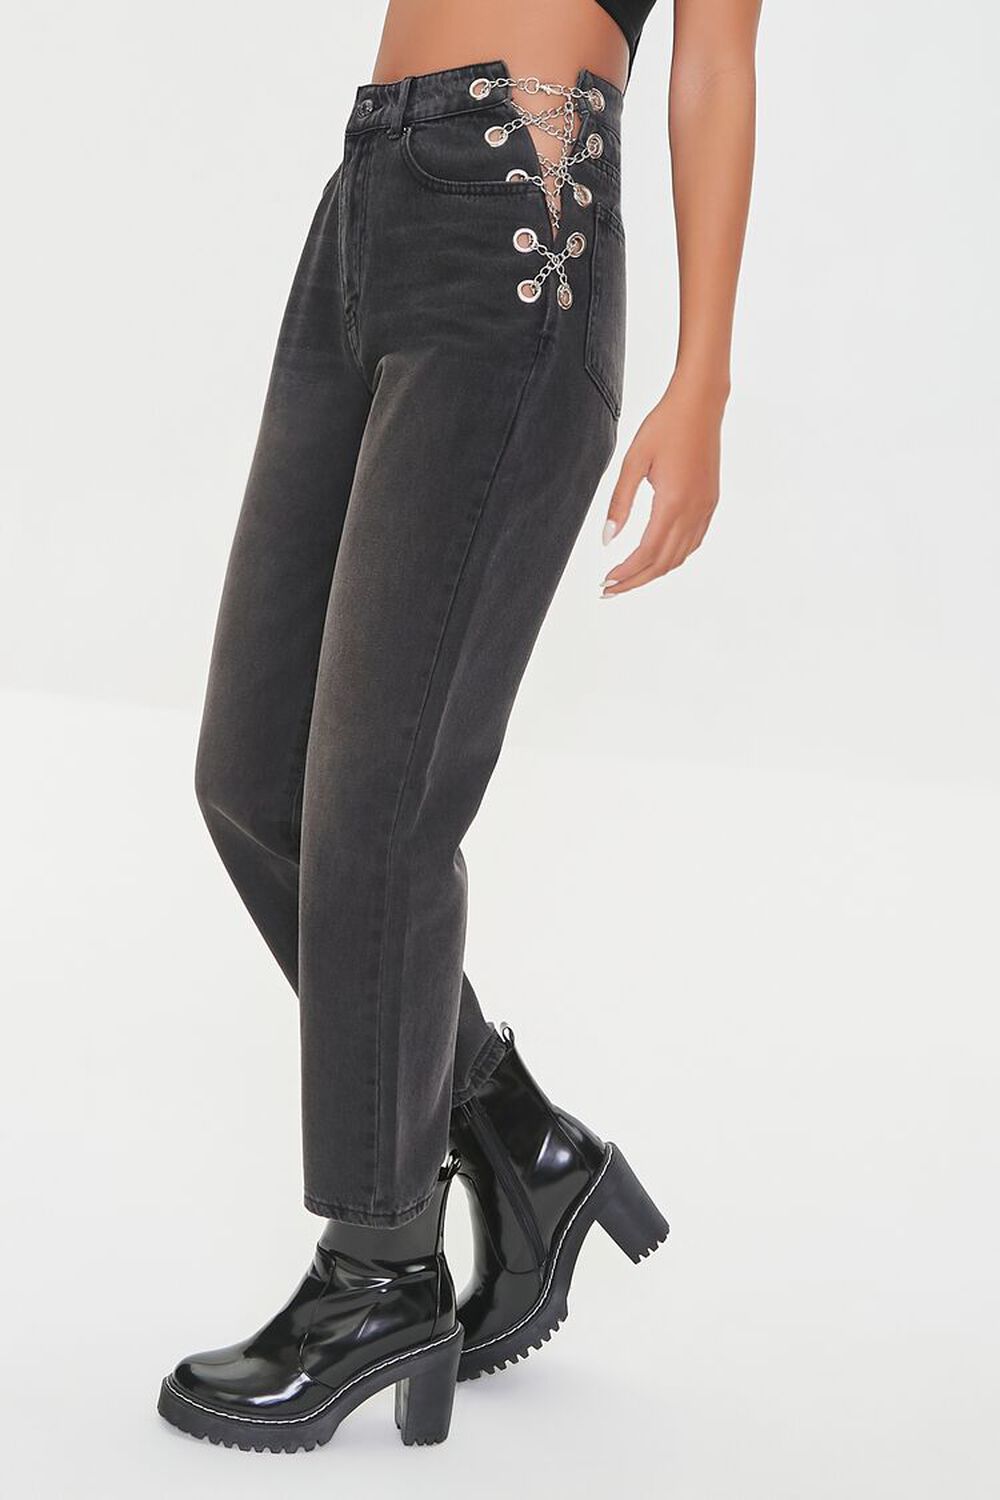 WASHED BLACK Curb Chain High-Rise Jeans, image 3